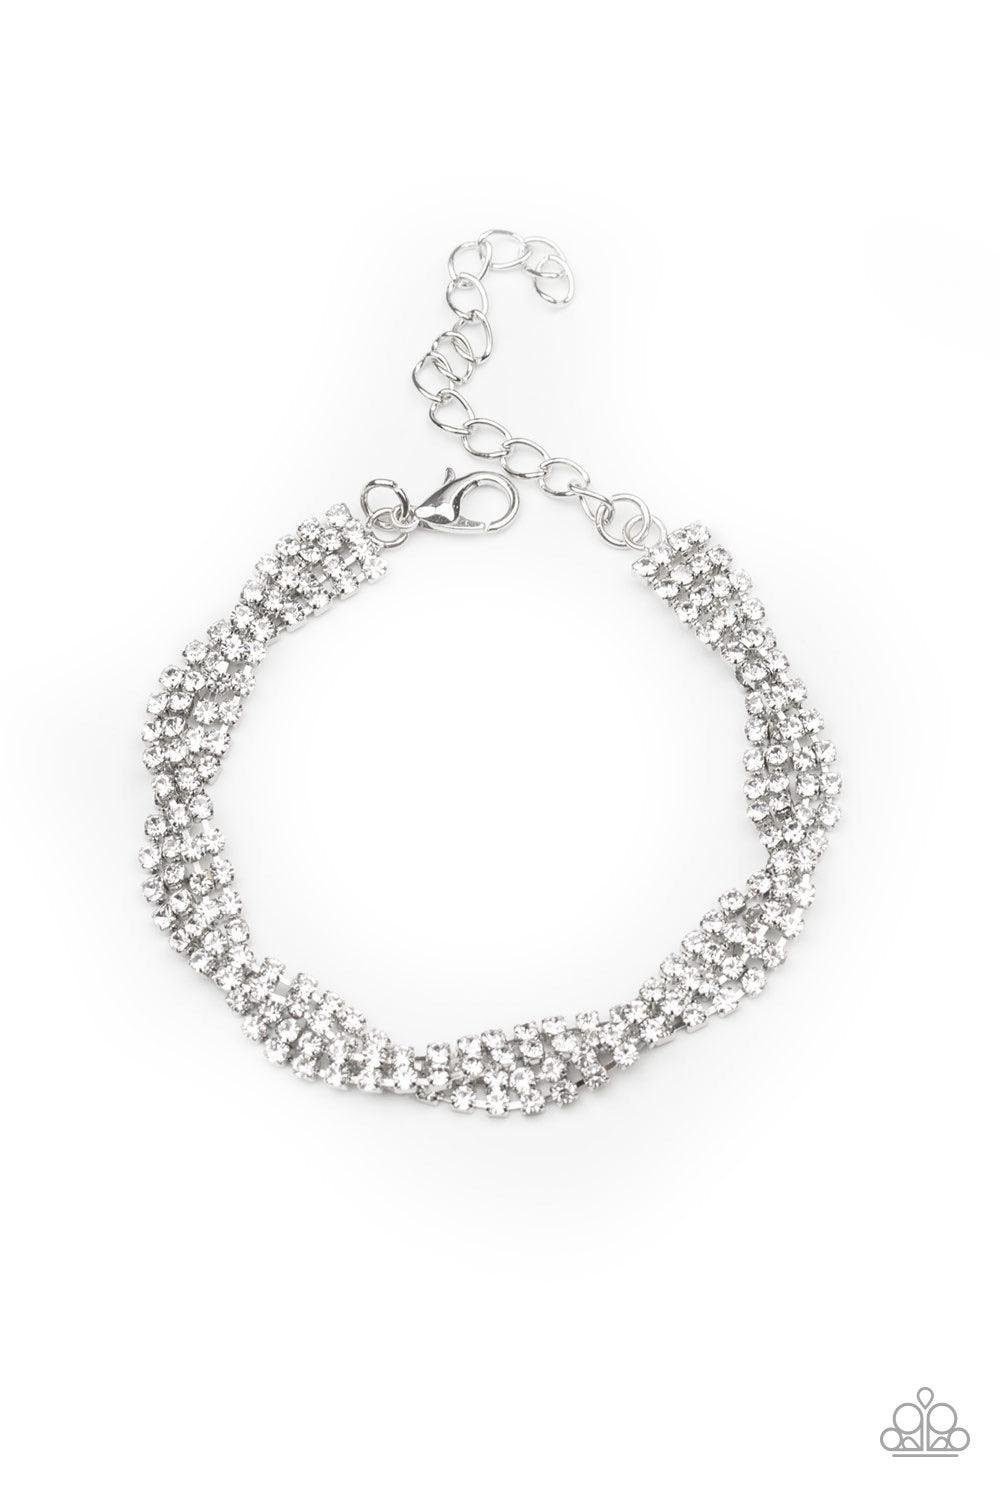 Paparazzi Accessories Braided Twilight - White Infused with glistening silver fittings, strands of glassy white rhinestones delicately braid across the wrist in timeless fashion. Features an adjustable clasp closure. Jewelry